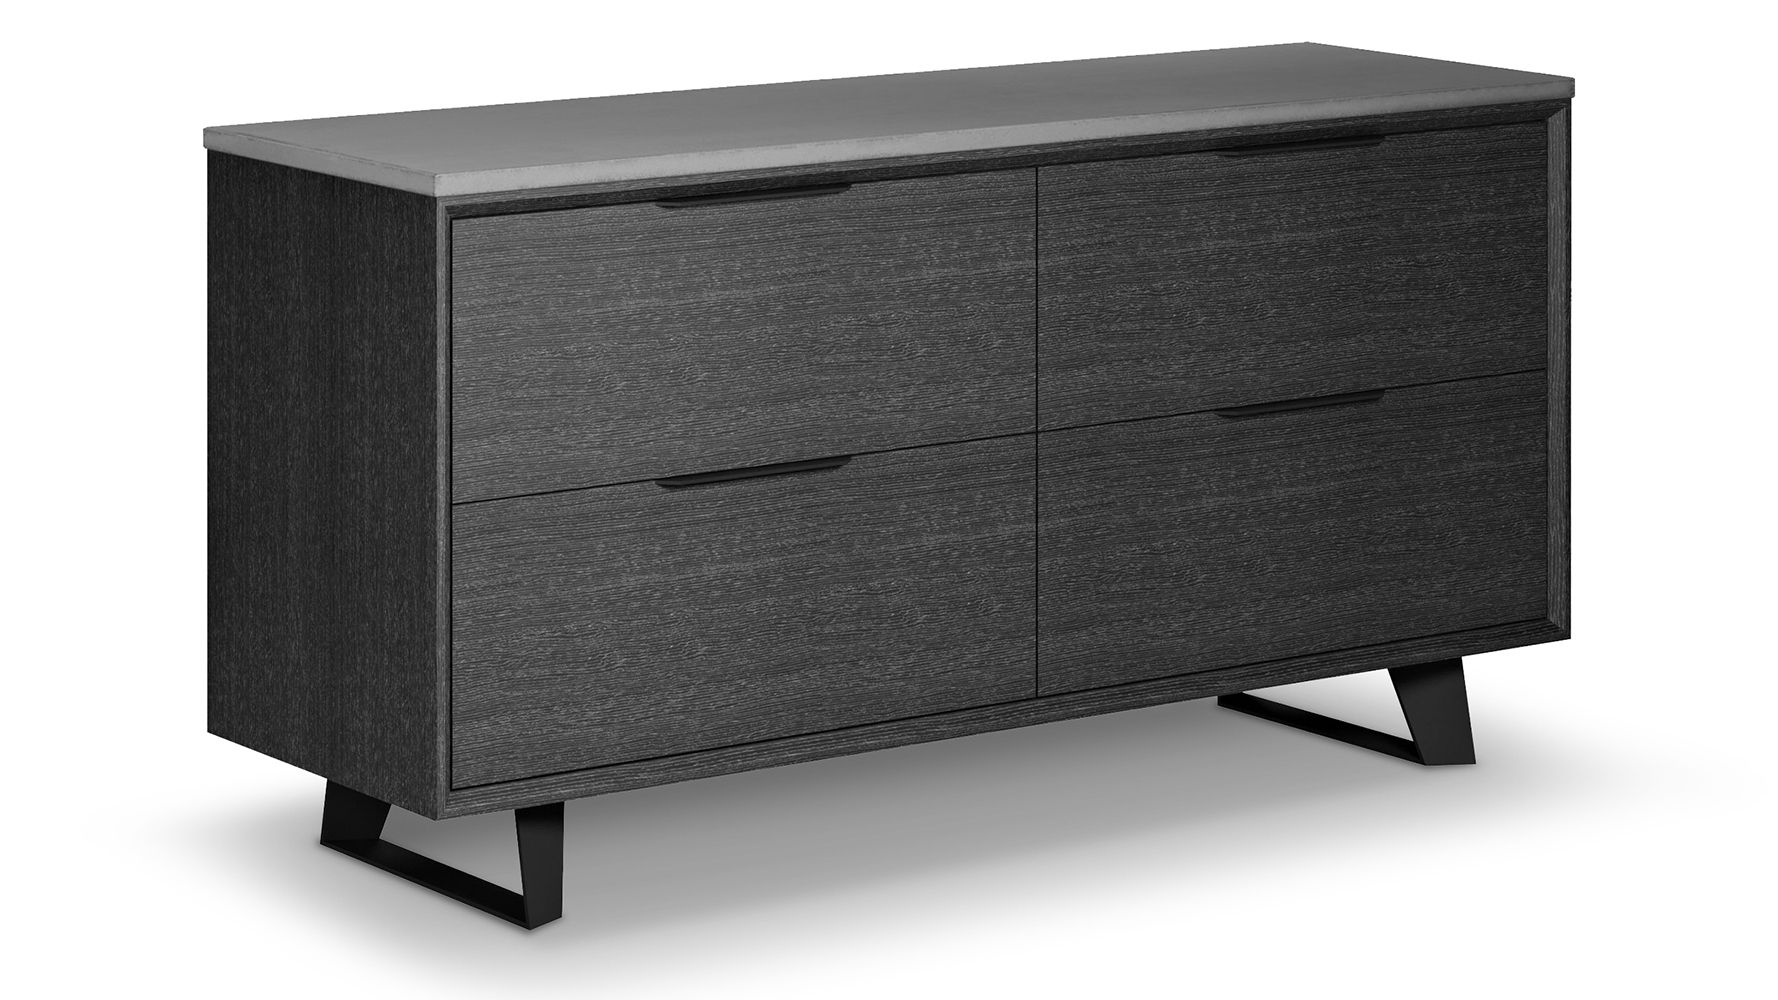 Adal File Credenza In Bright Angles Credenzas (View 17 of 20)